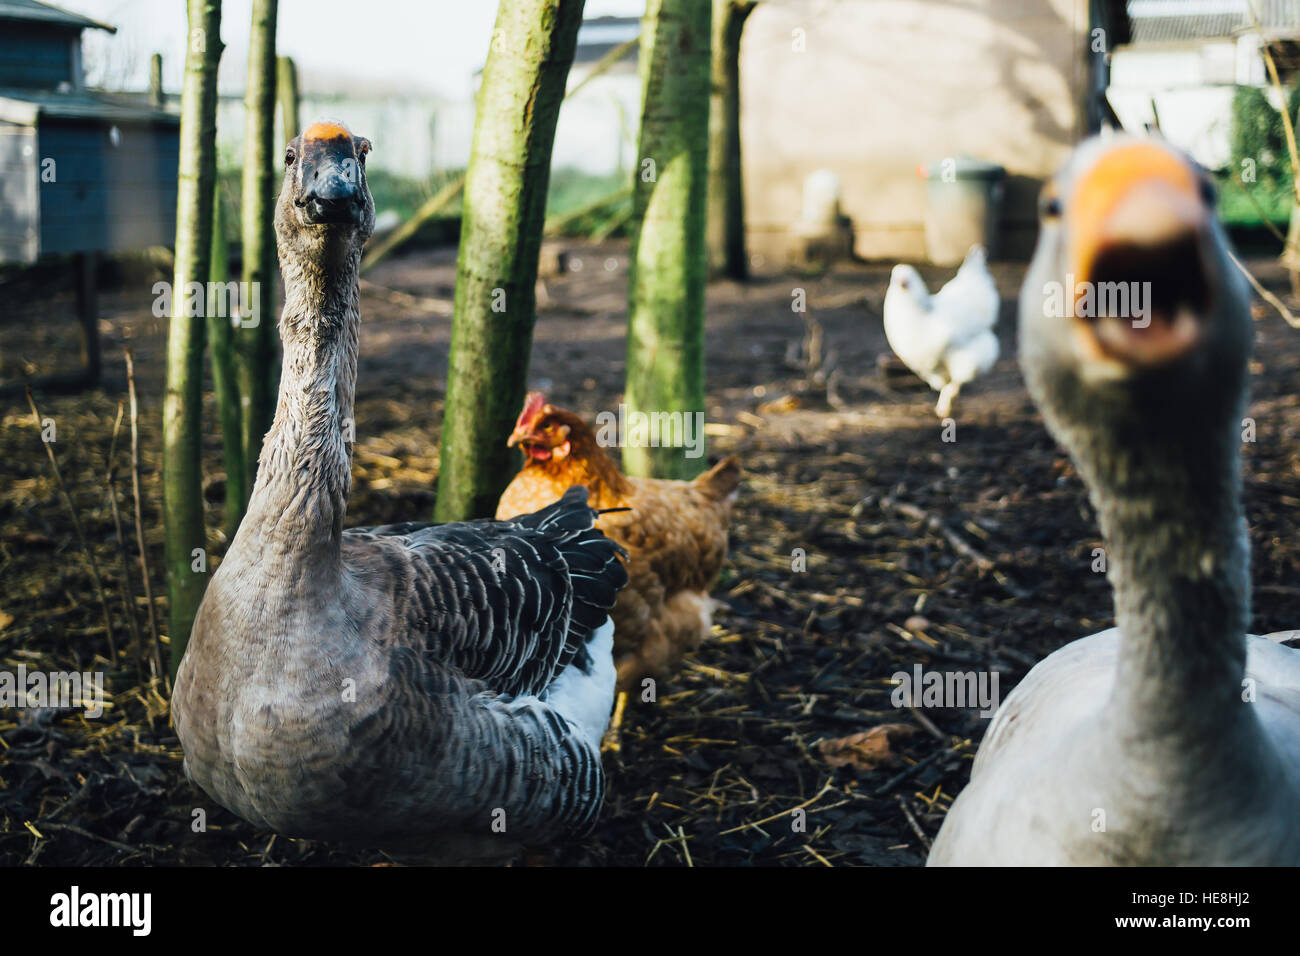 An angry grey goose and another one standing further away in an enclosure with chickens. Stock Photo